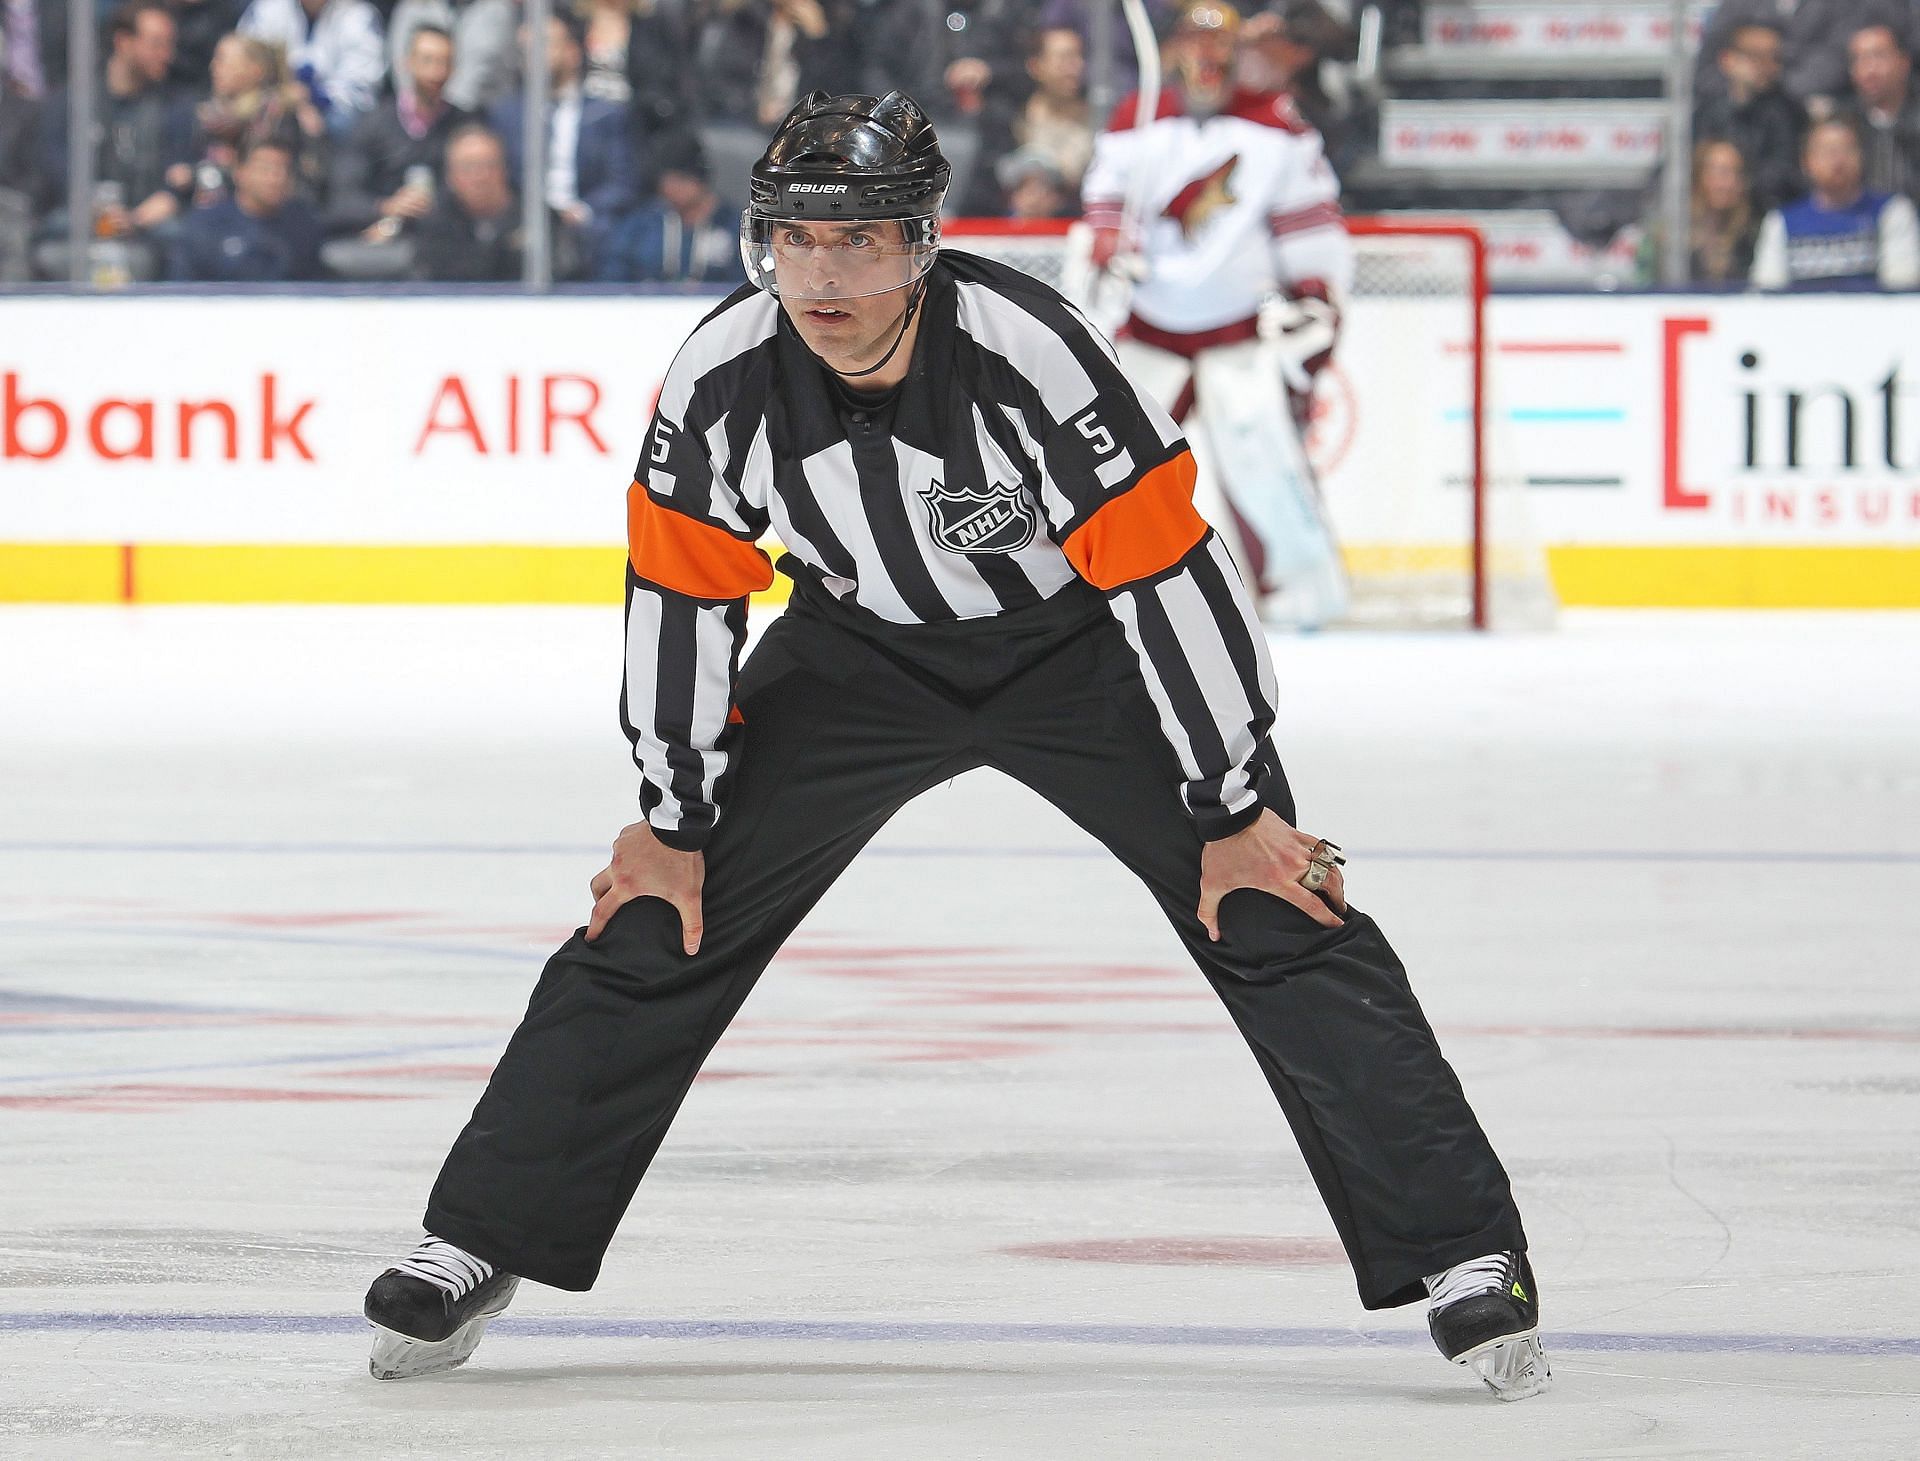 What is the difference between a referee and a linesman in the NHL? - Quora